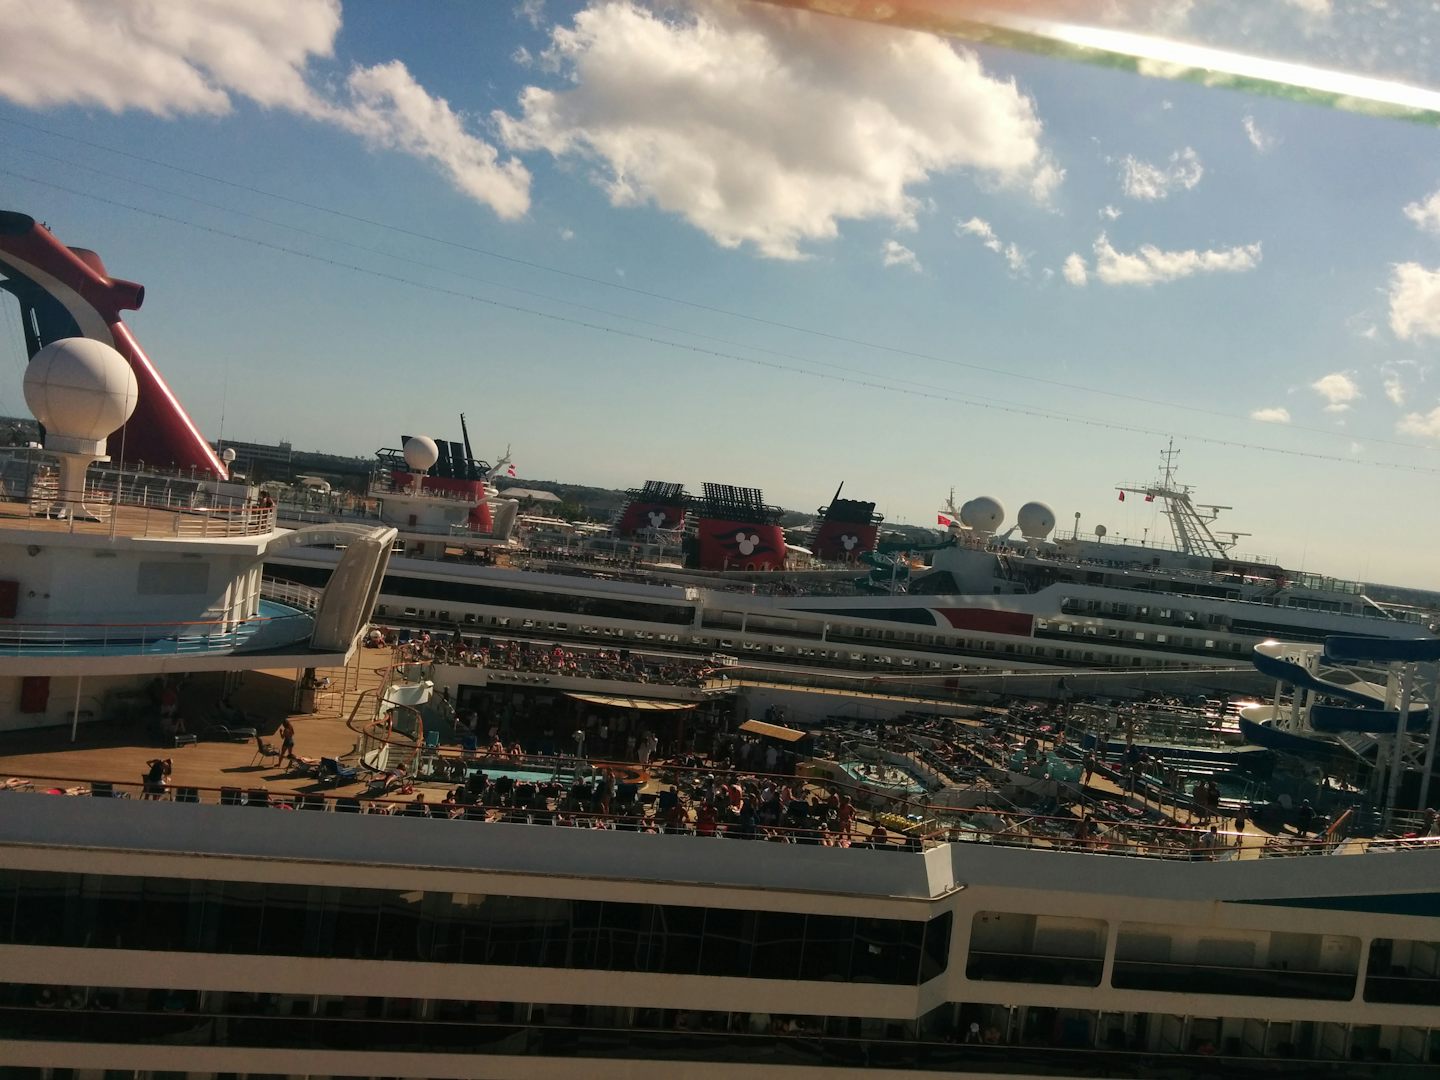 Adjacent Carnival, and two Disney cruise ships. I believe the Escape has the best pool deck of all.